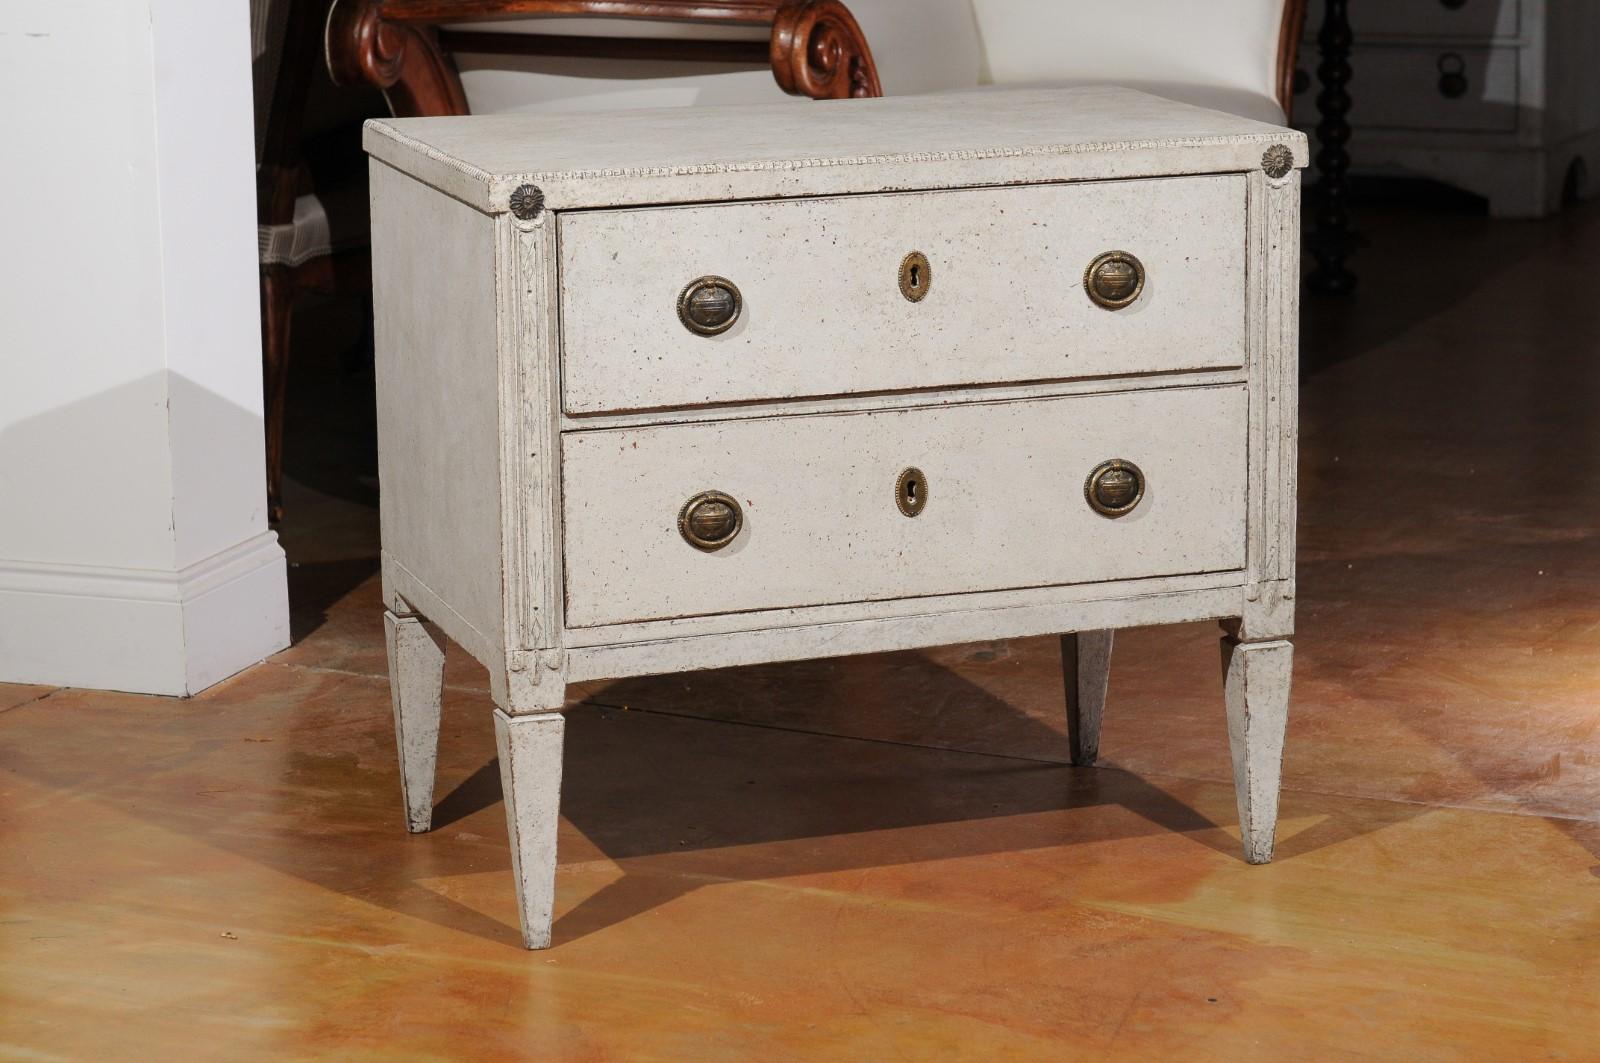 A Swedish Gustavian style painted wood two-drawer chest from the 19th century, with carved motifs and rosettes. Created in Sweden during the 19th century, this painted chest features a rectangular top with beaded motifs, sitting above two drawers